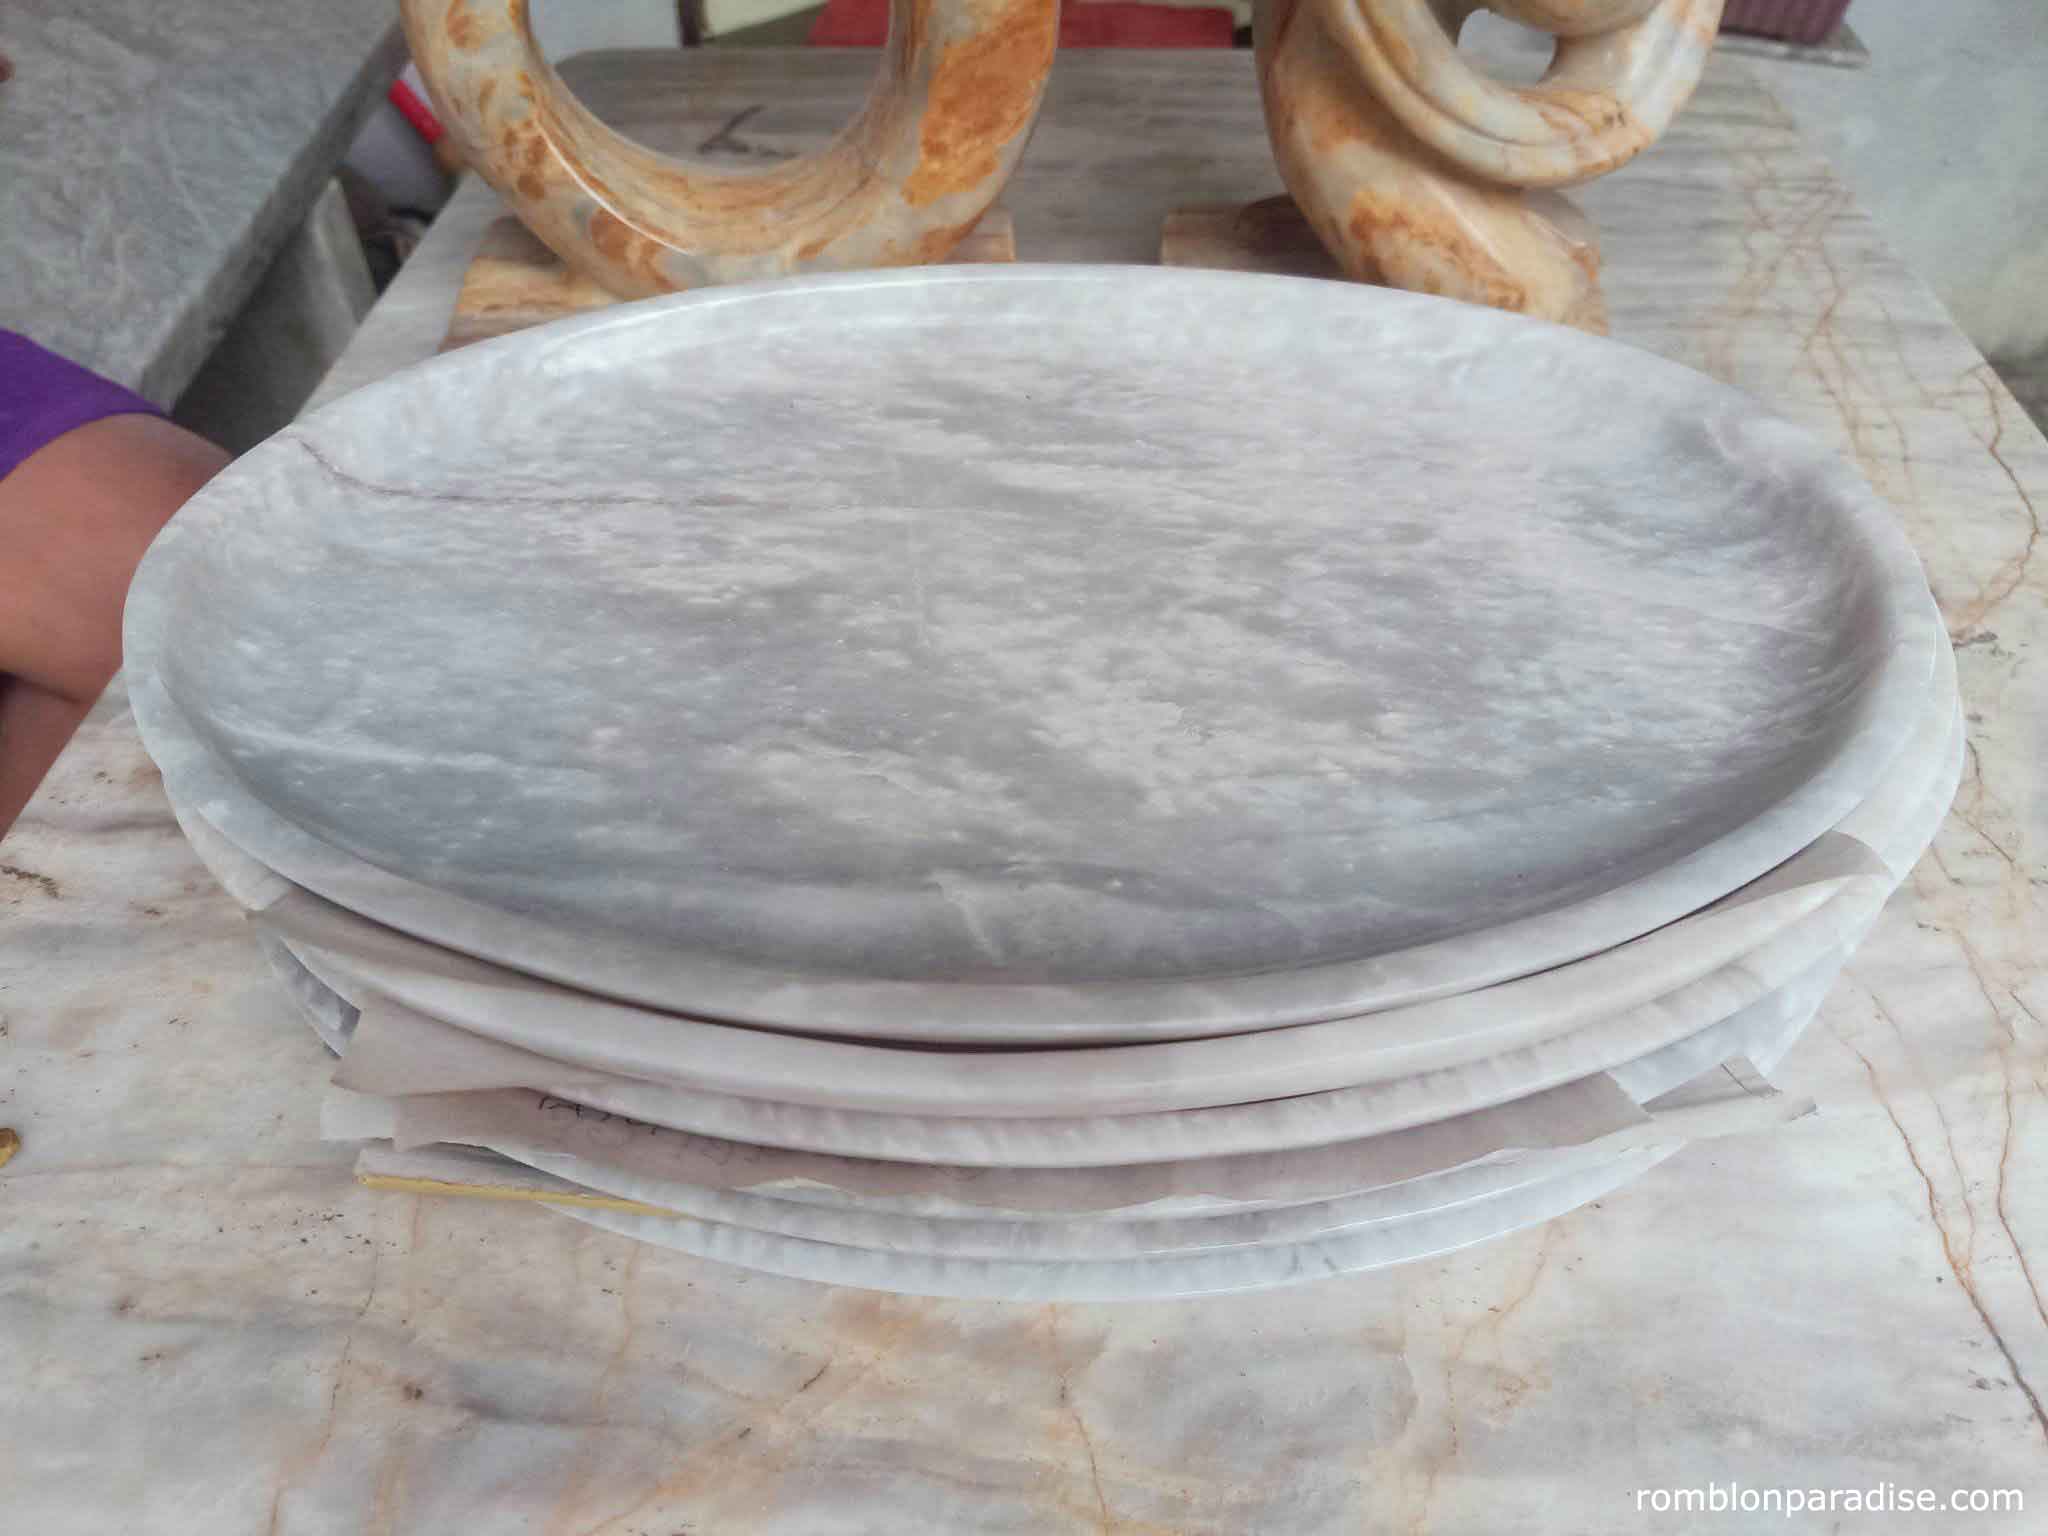 Marble Products in romblon